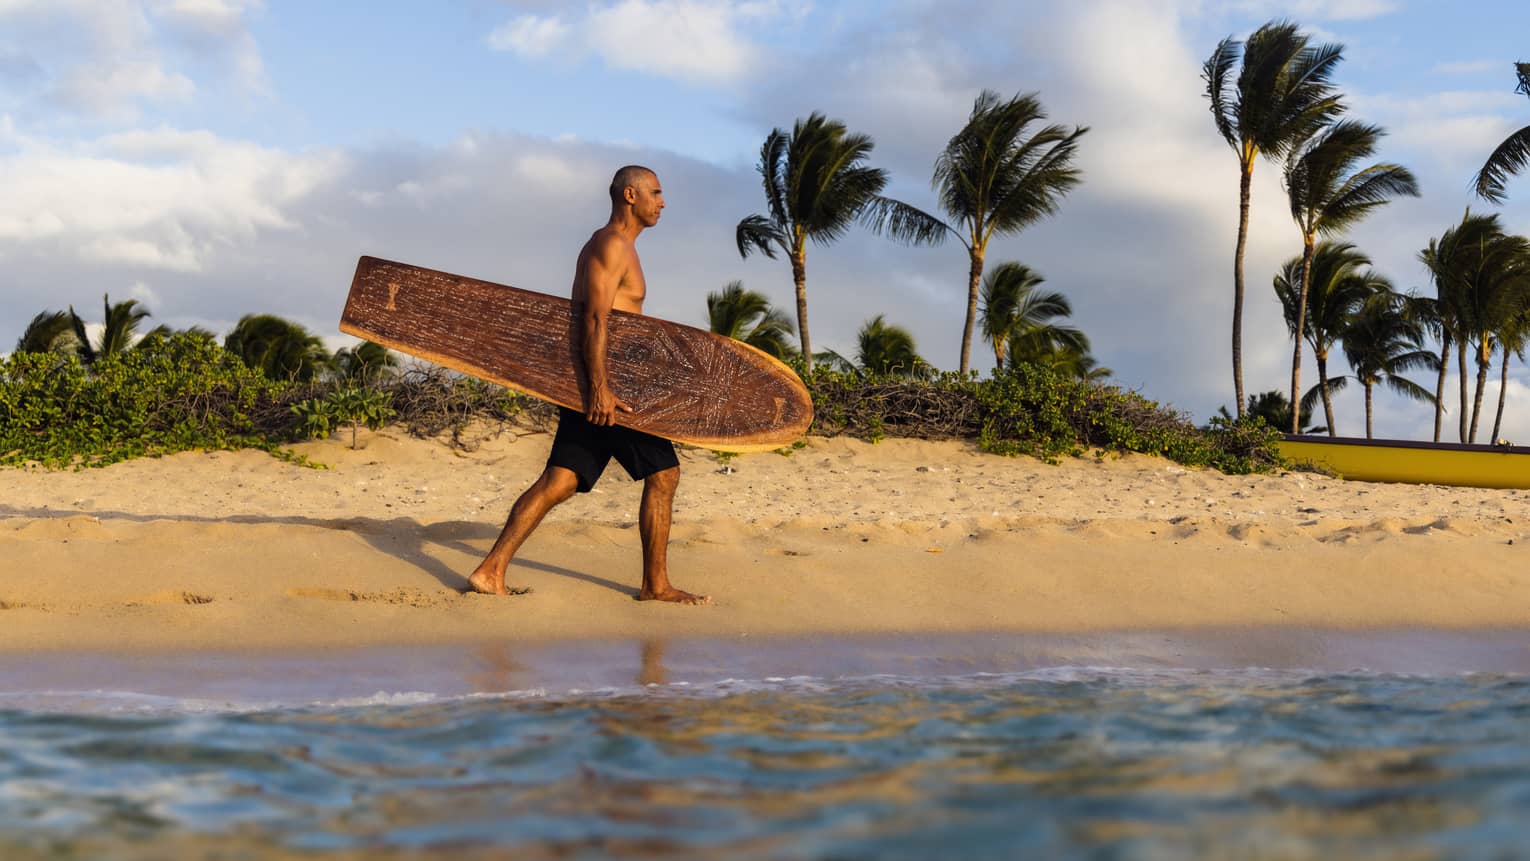 Surfboard designer Bonga Perkins walks along the water's edge with intricately carved wooden surfboard, palm trees swaying in the distance